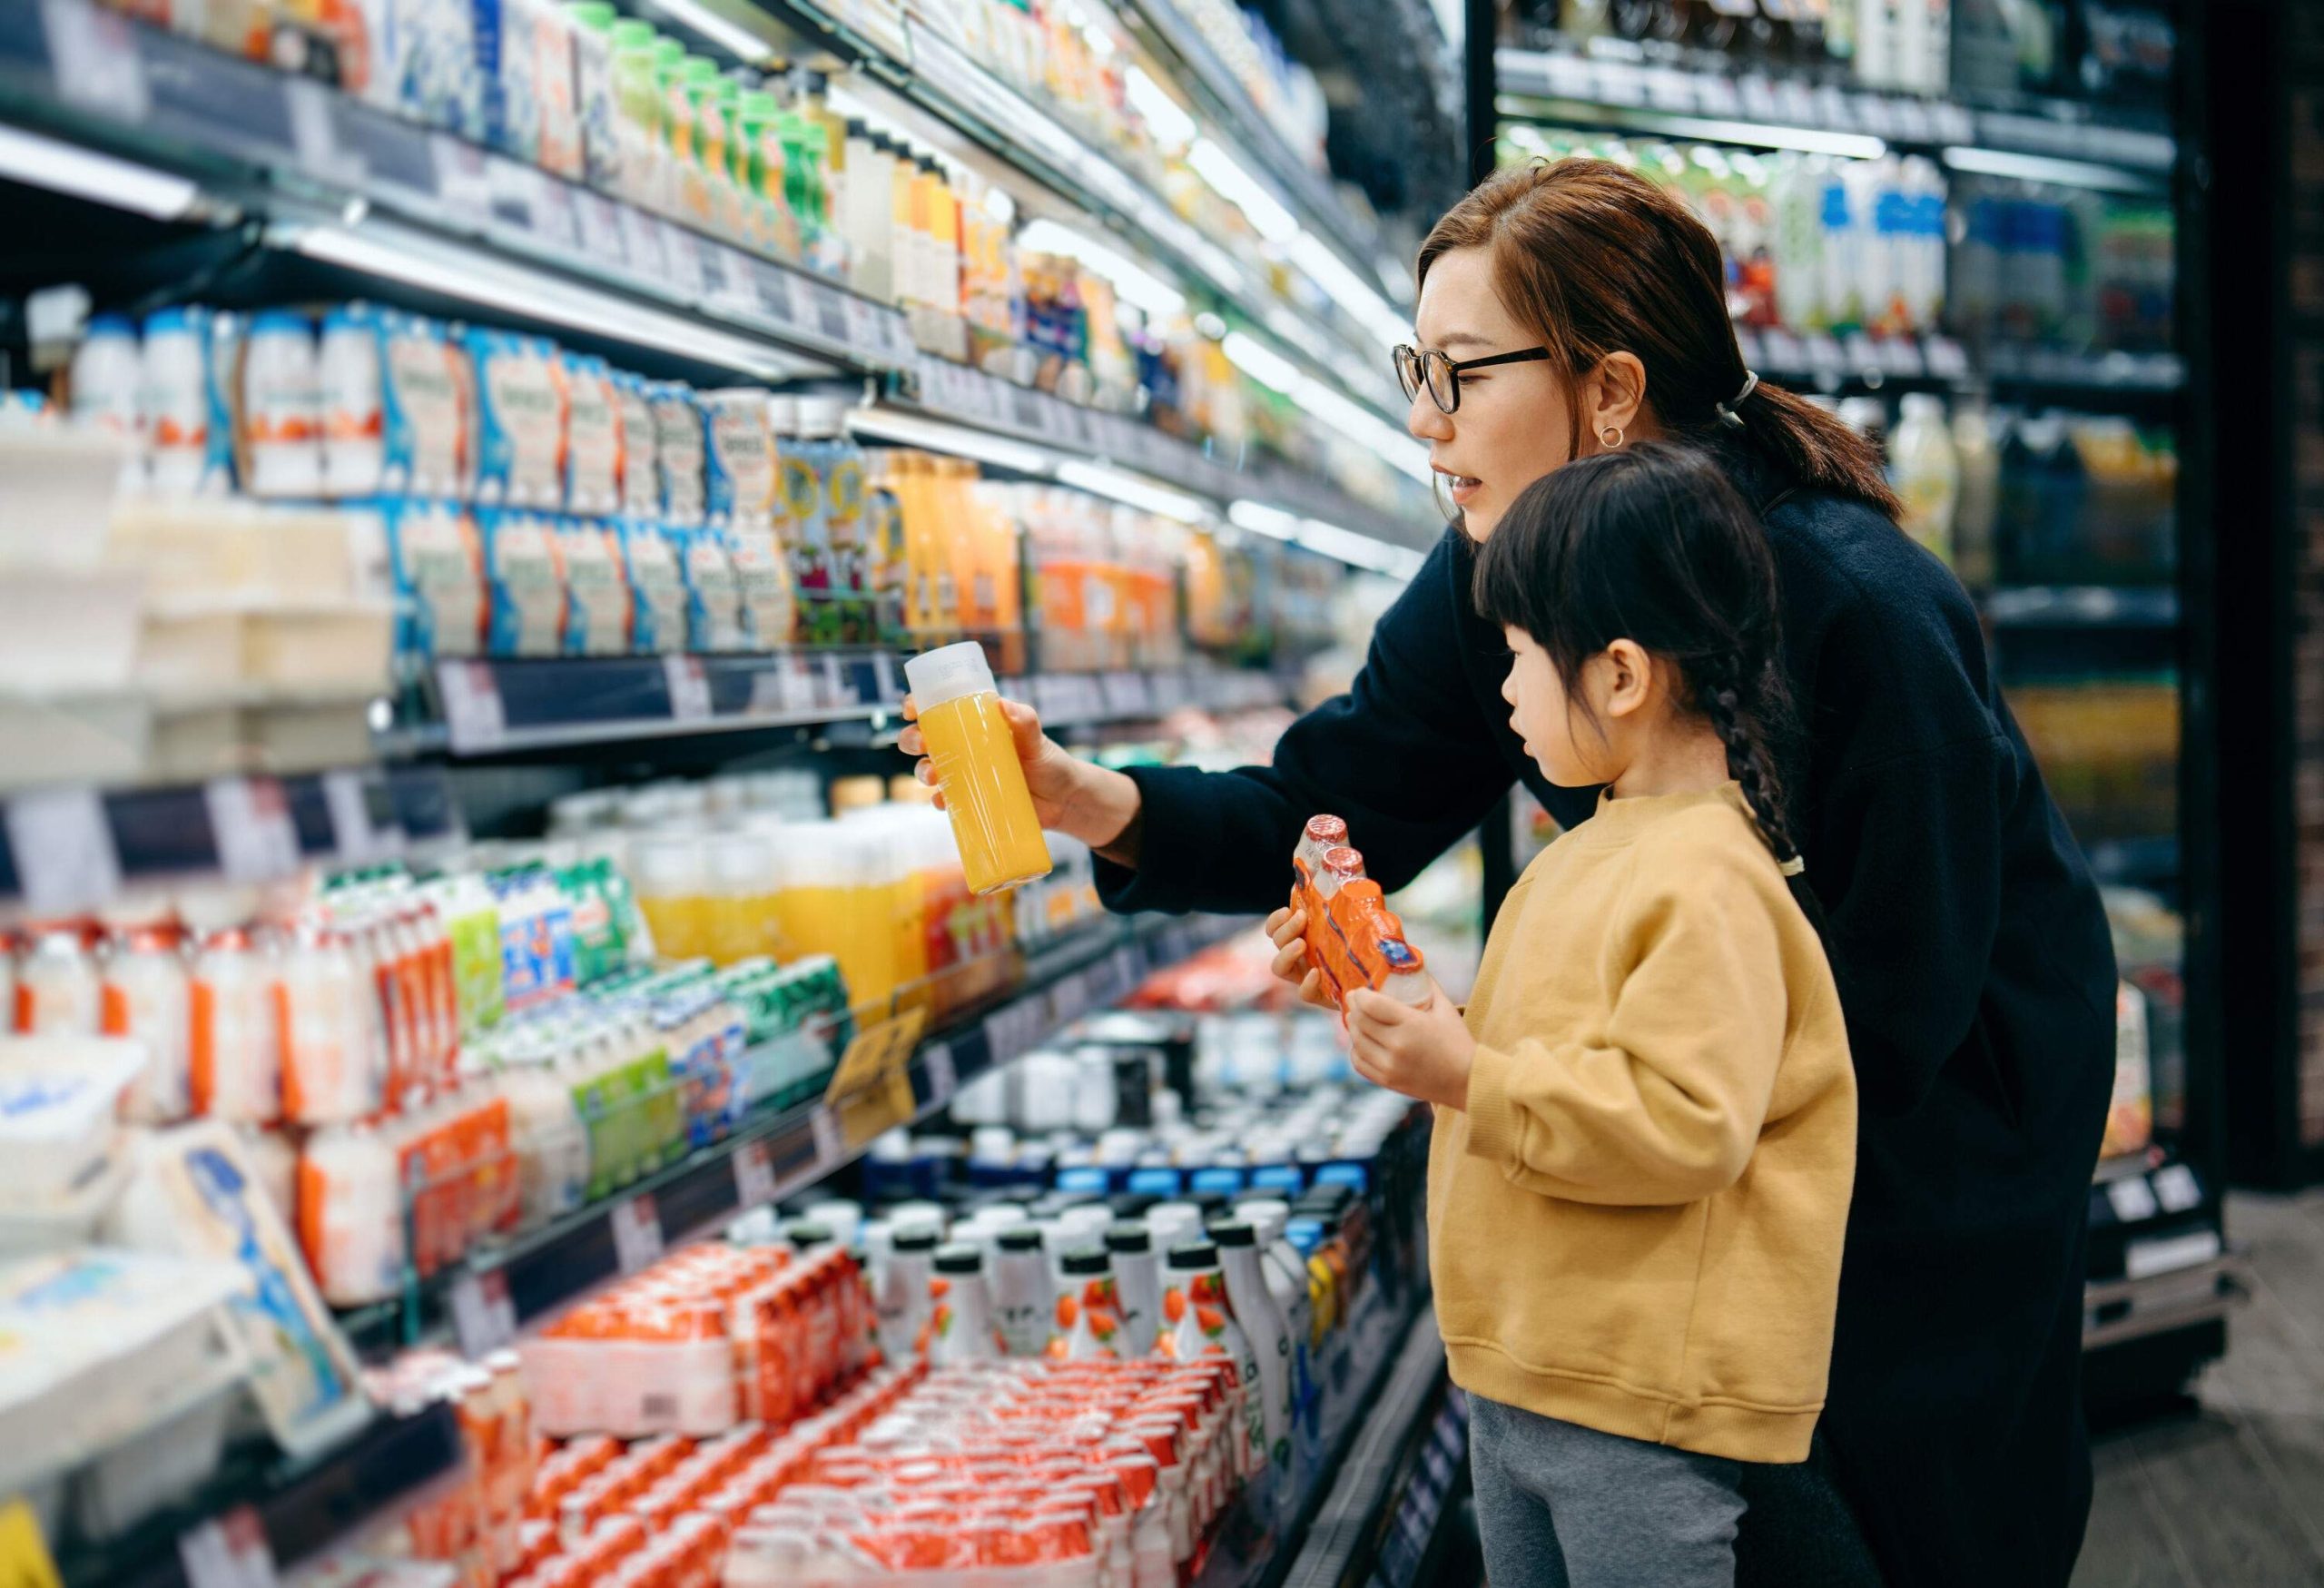 Young mother and her little daughter grocery shopping in supermarket. they are choosing fresh fruit juice together along the beverage aisle. Routine grocery shopping. Healthy eating lifestyle